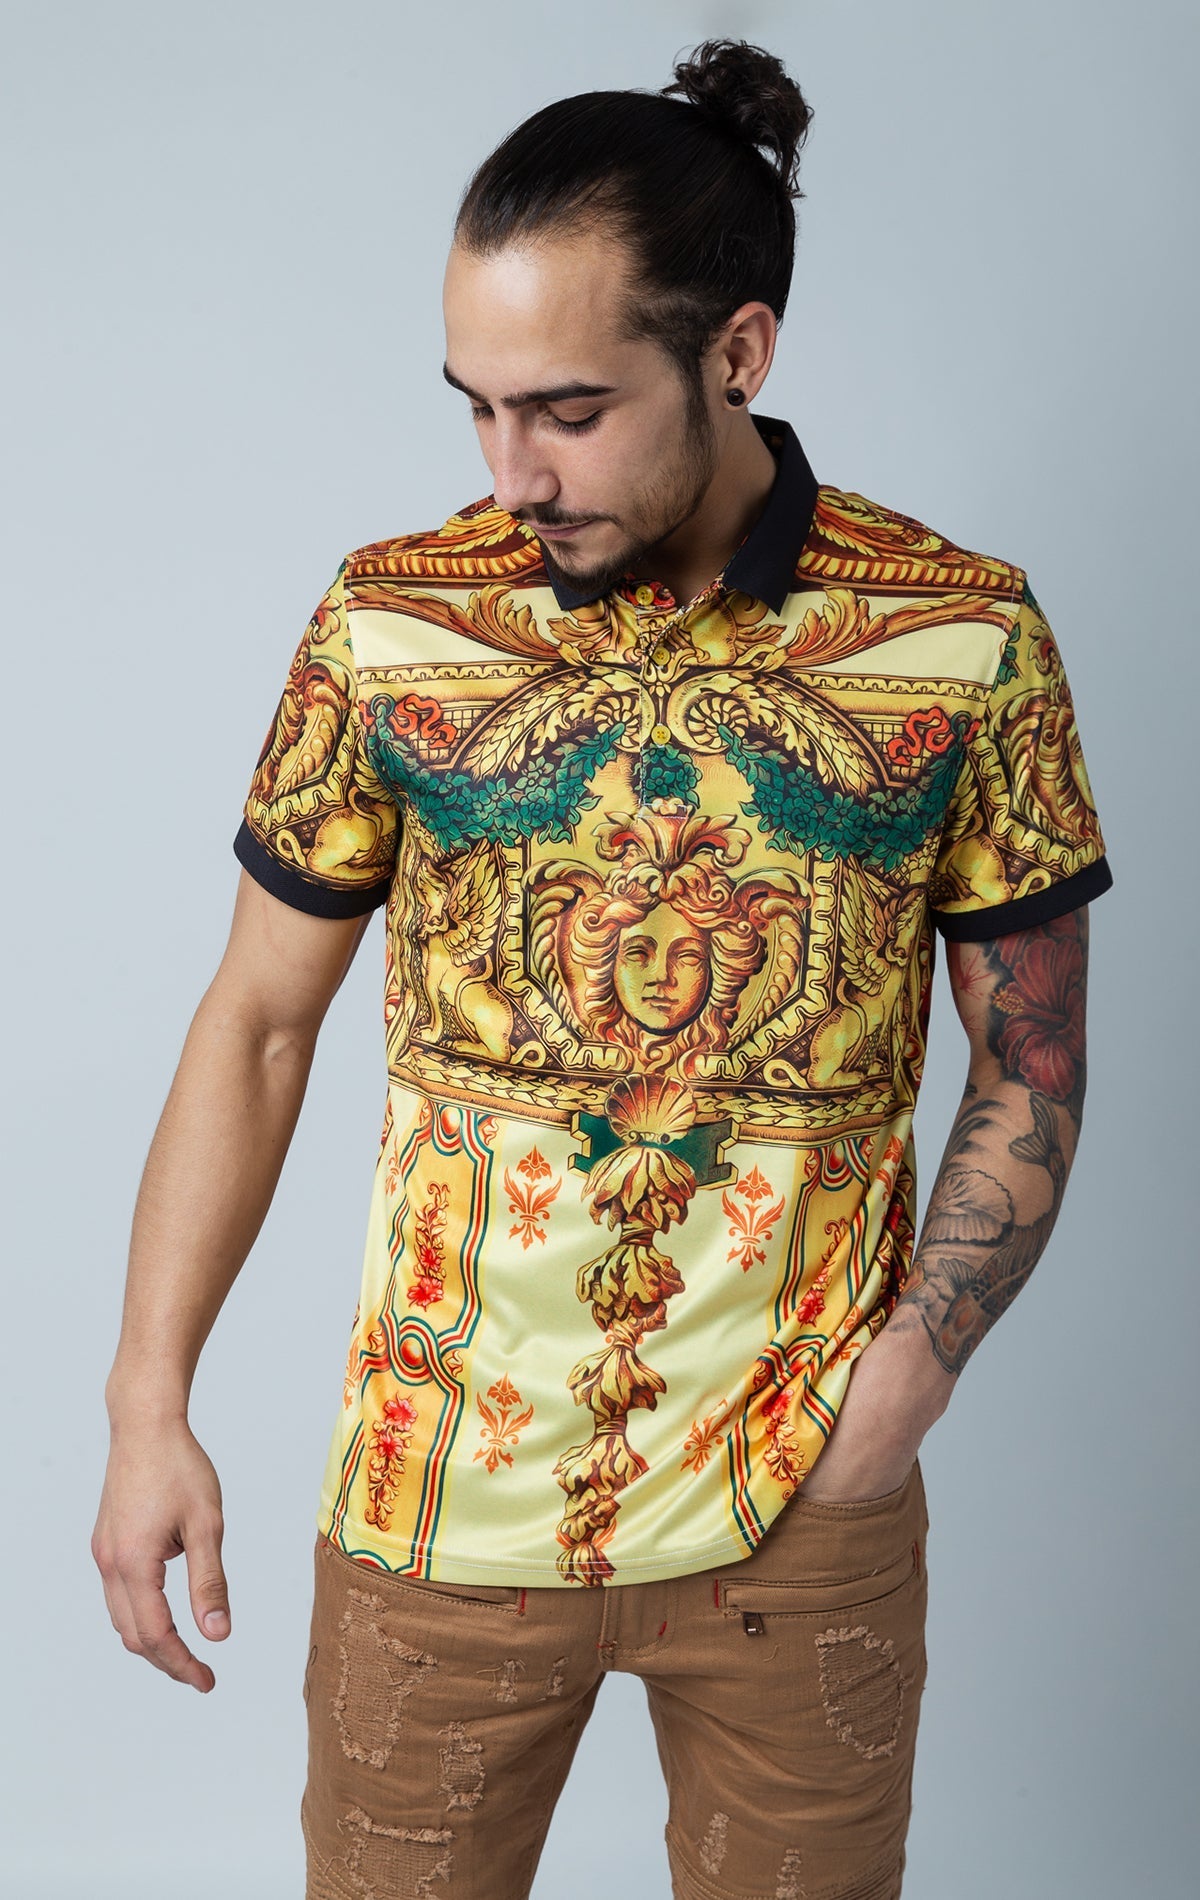 Men's printed Medusa and floral short-sleeve polo shirt with a Baroque design, contrasting collar, and three-button closure in gold and black.